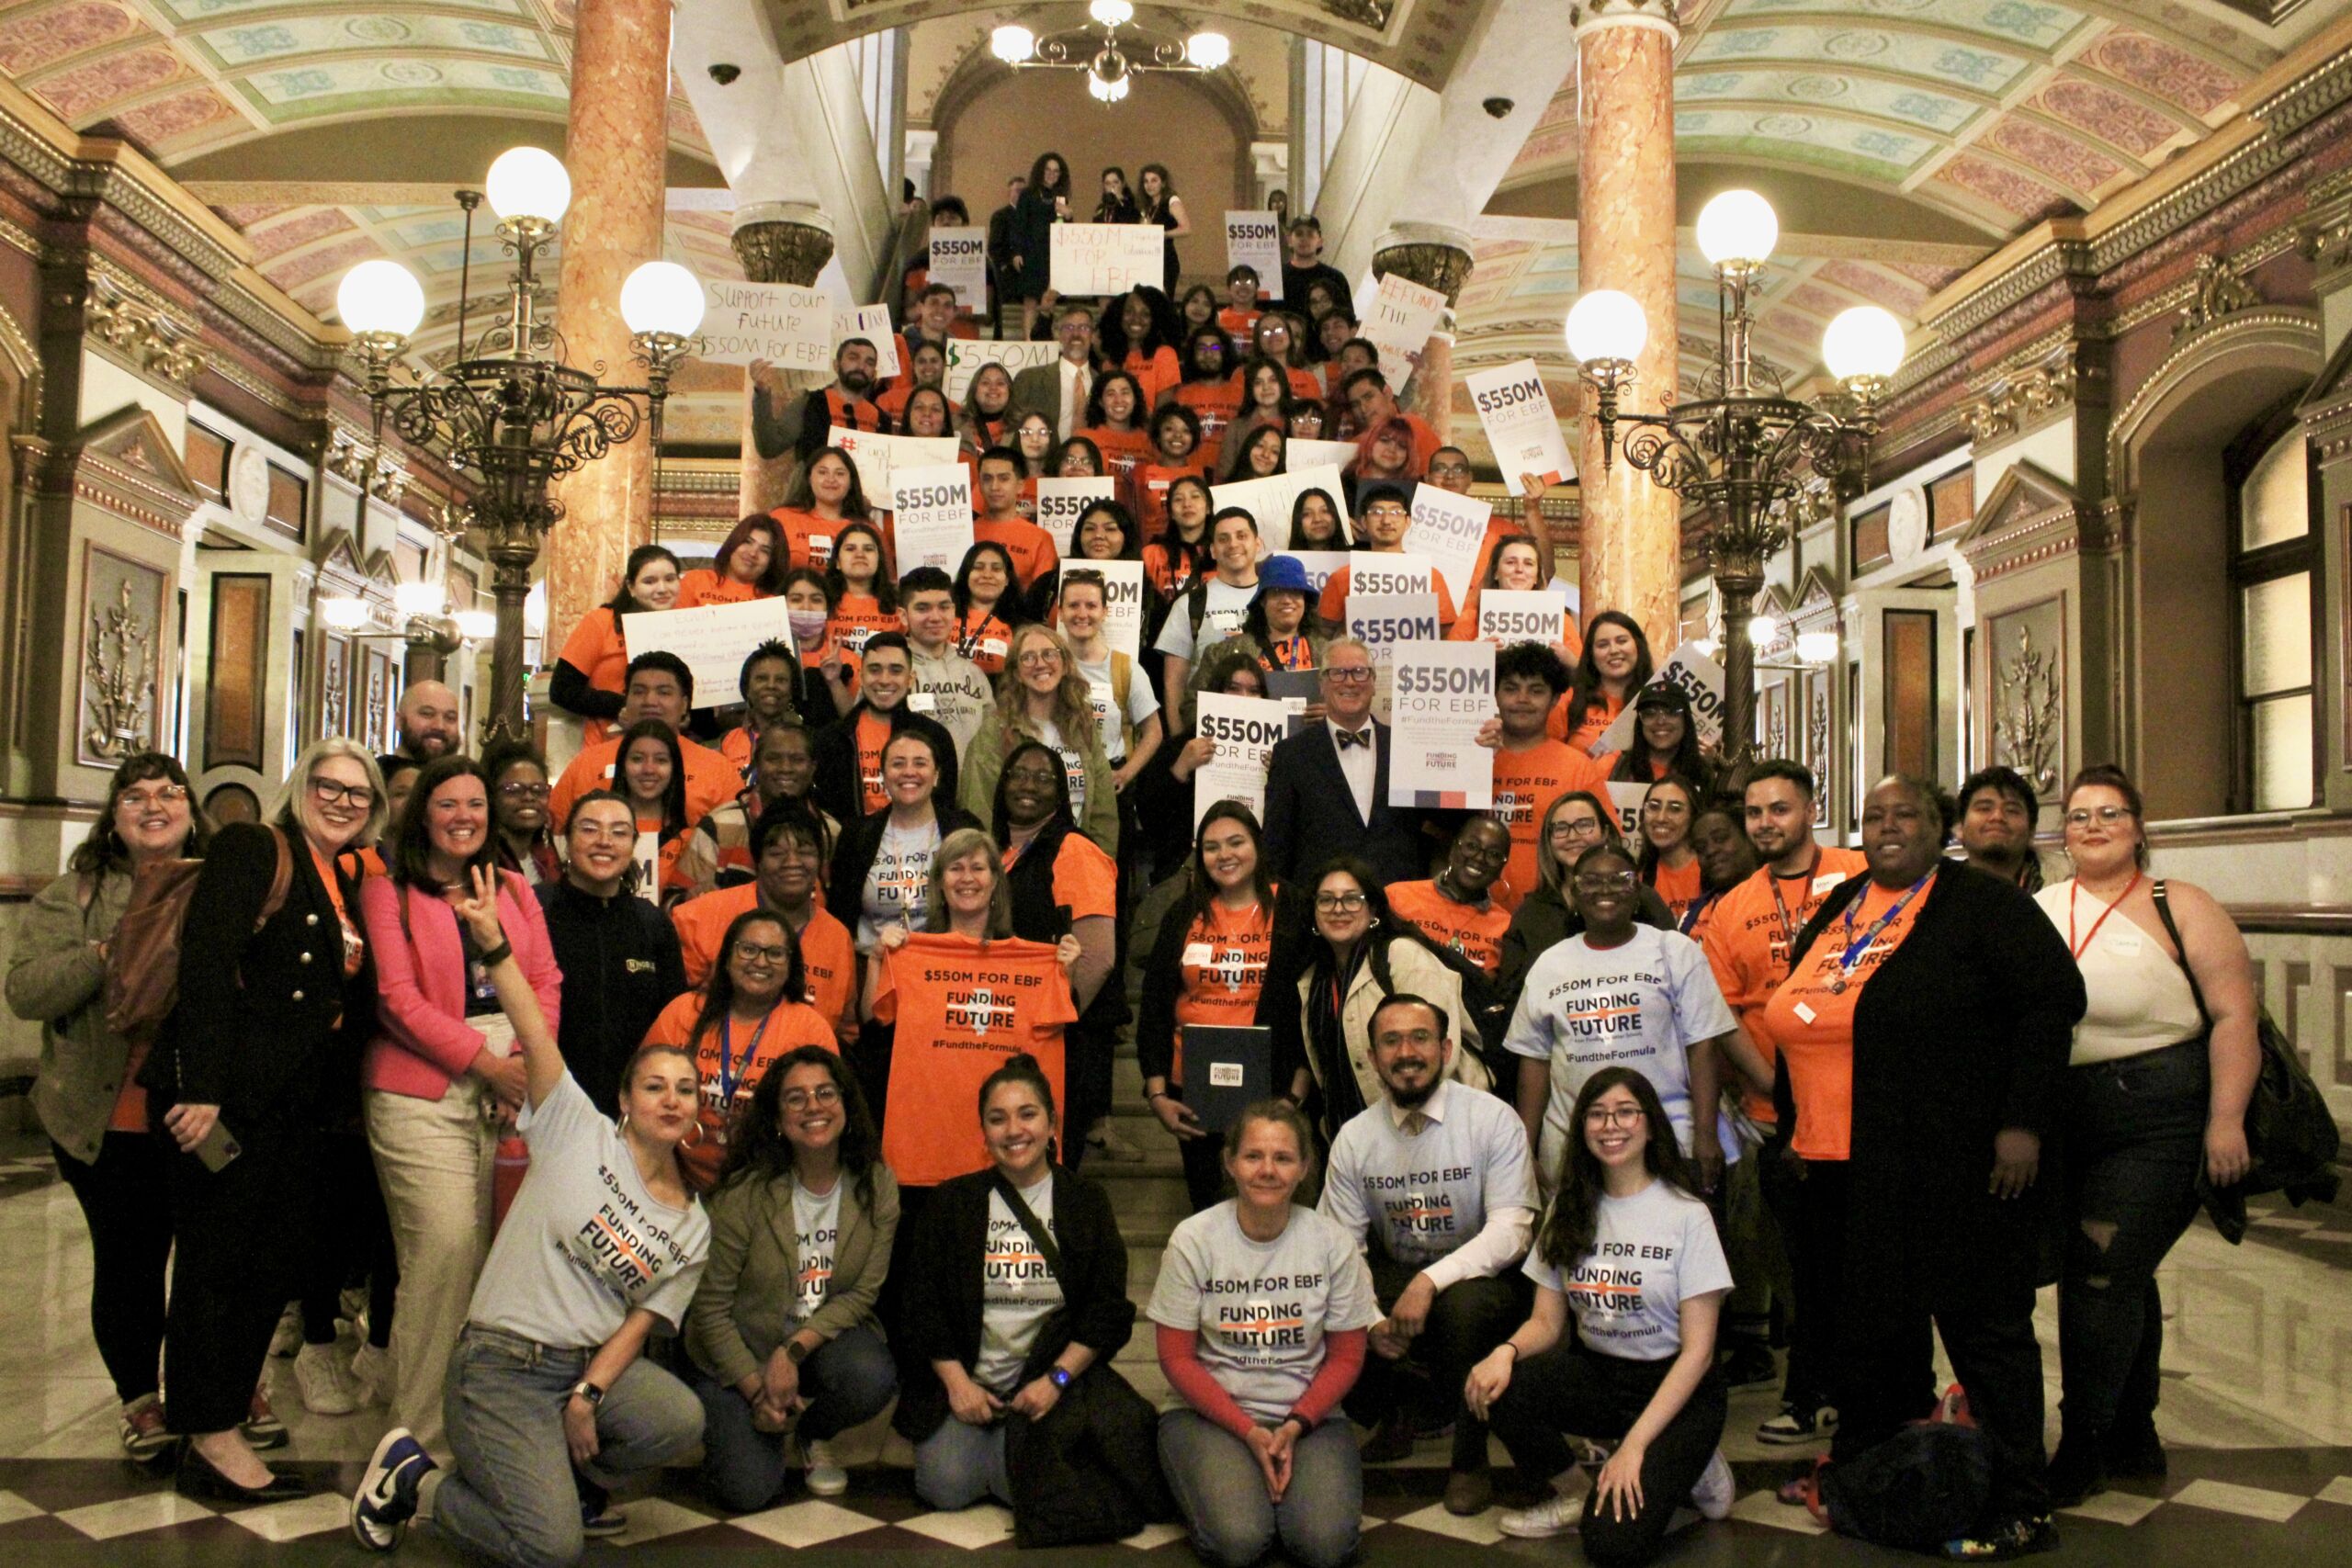 Photo shows a group shot of everyone who showed up in April 2023 to advocate for evidence-based funding for Illinois schools. The group is standing and posing up the stairs of the Illinois State Capitol building. This group includes Noble Schools' parents and staff, the team at Funding Illinois Future, and other Illinois public schools parents, staff, and community members. Most people are smiling and wearing bright orange shirts that read "$550M for Evidence-Based Funding" and have the Funding Illinois Future logo on them. Many people in the back and at the top of the stairs are holding signs that say the same thing.